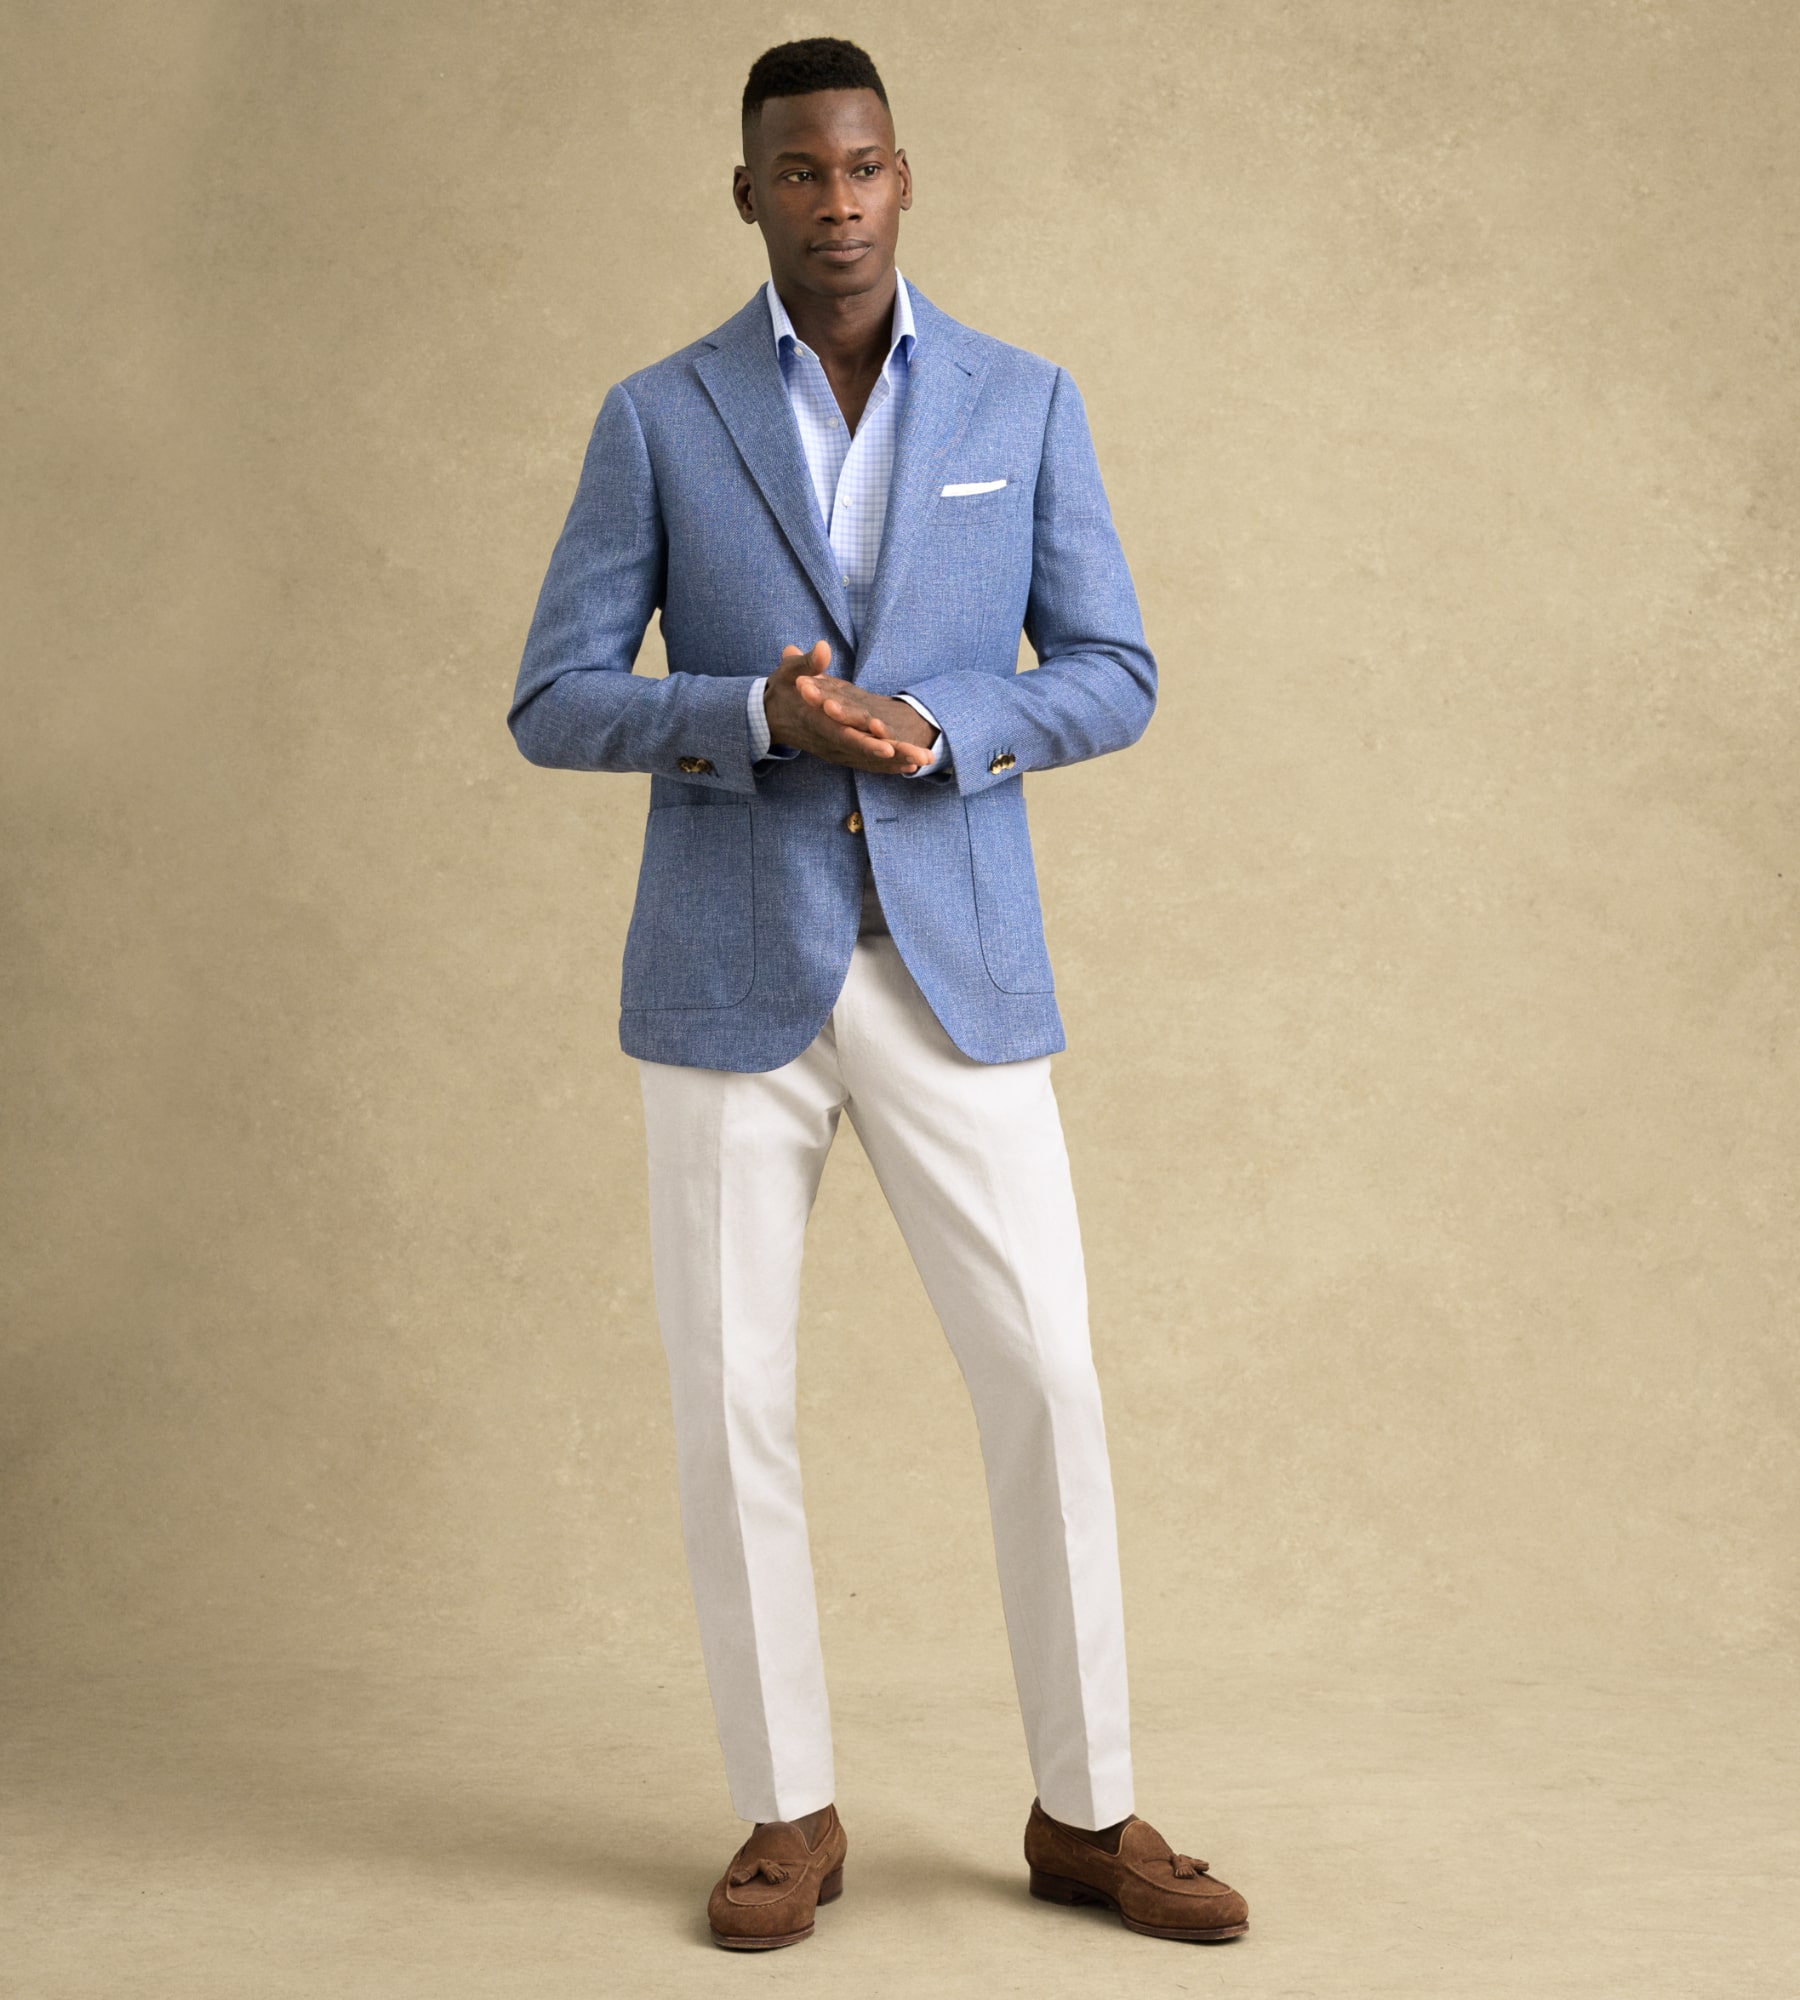 Men's Wedding 2016 Style from Reiss | Wedding outfit men, Summer wedding  outfits, Mens outfits